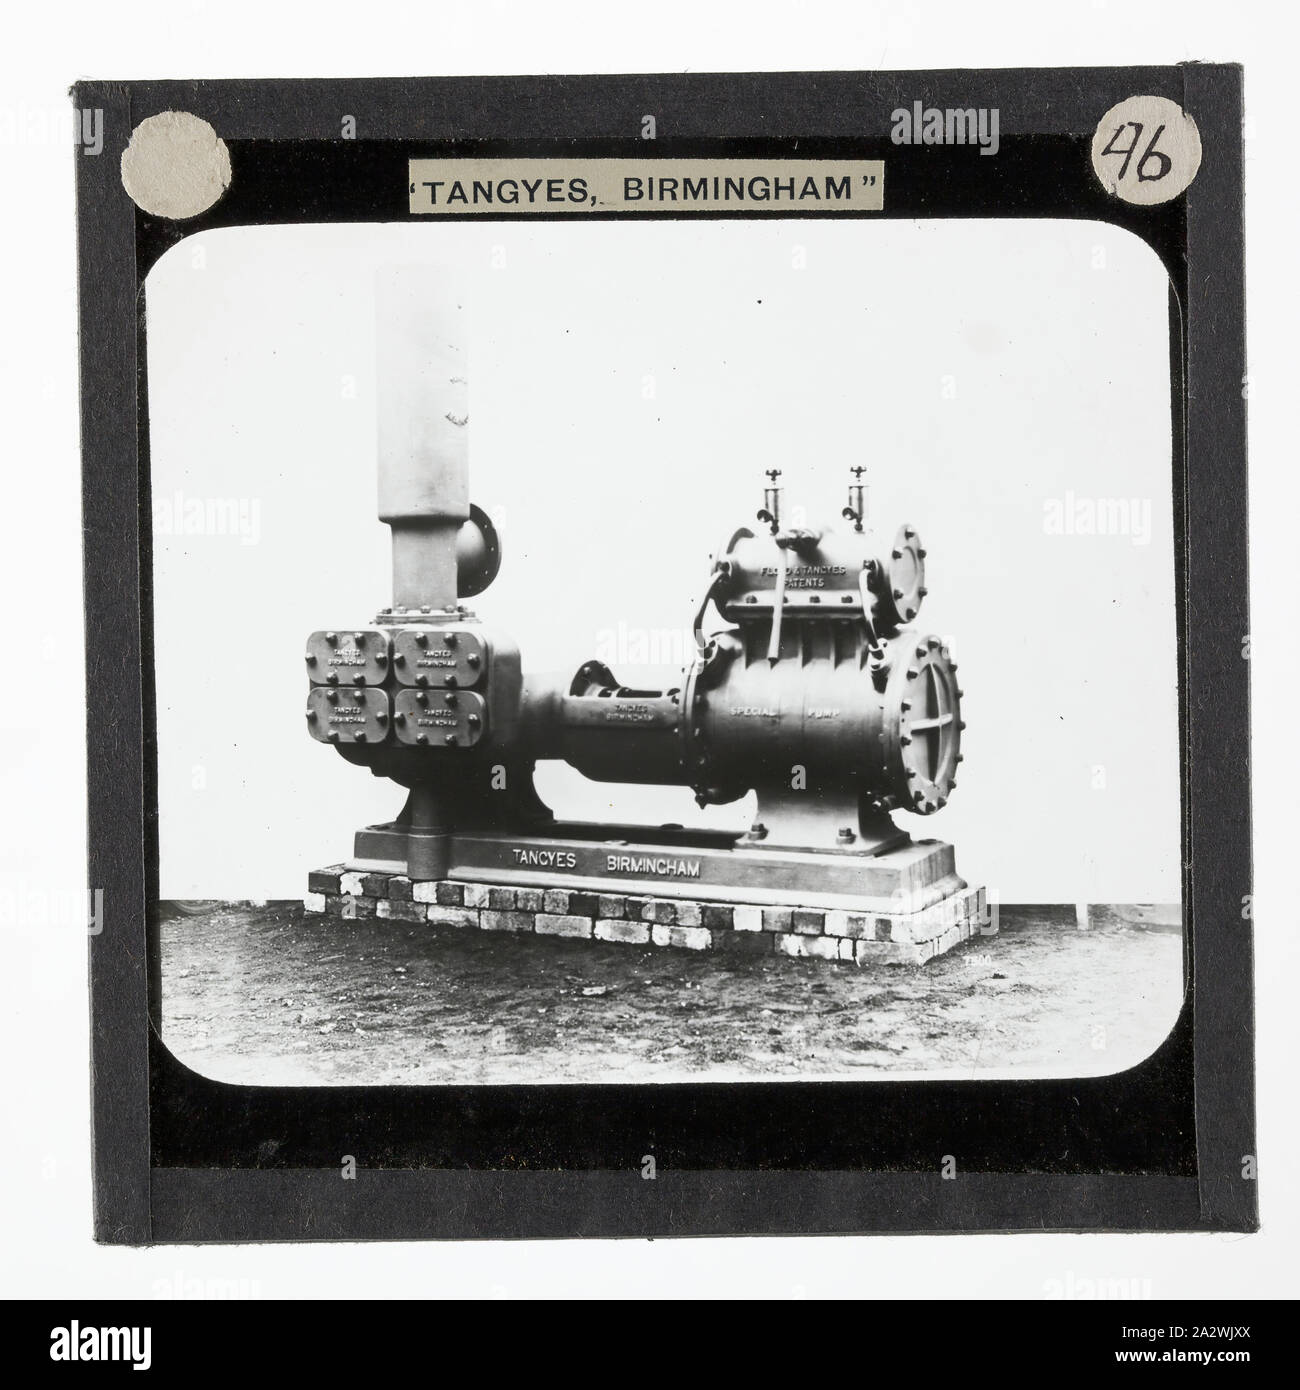 Lantern Slide - Tangyes Ltd, Steam Powered Horizontal Simplex Pump with Accumulator, circa 1910, One of 239 glass lantern slides depicting products manufactured by Tangyes Limited engineers of Birmingham, England. The images include various products such as engines, centrifugal pumps, hydraulic pumps, gas producers, materials testing machines, presses, machine tools, hydraulic jacks etc. Tangyes was a company which operated from 1857 to 1957. They produced a wide variety of engineering Stock Photo